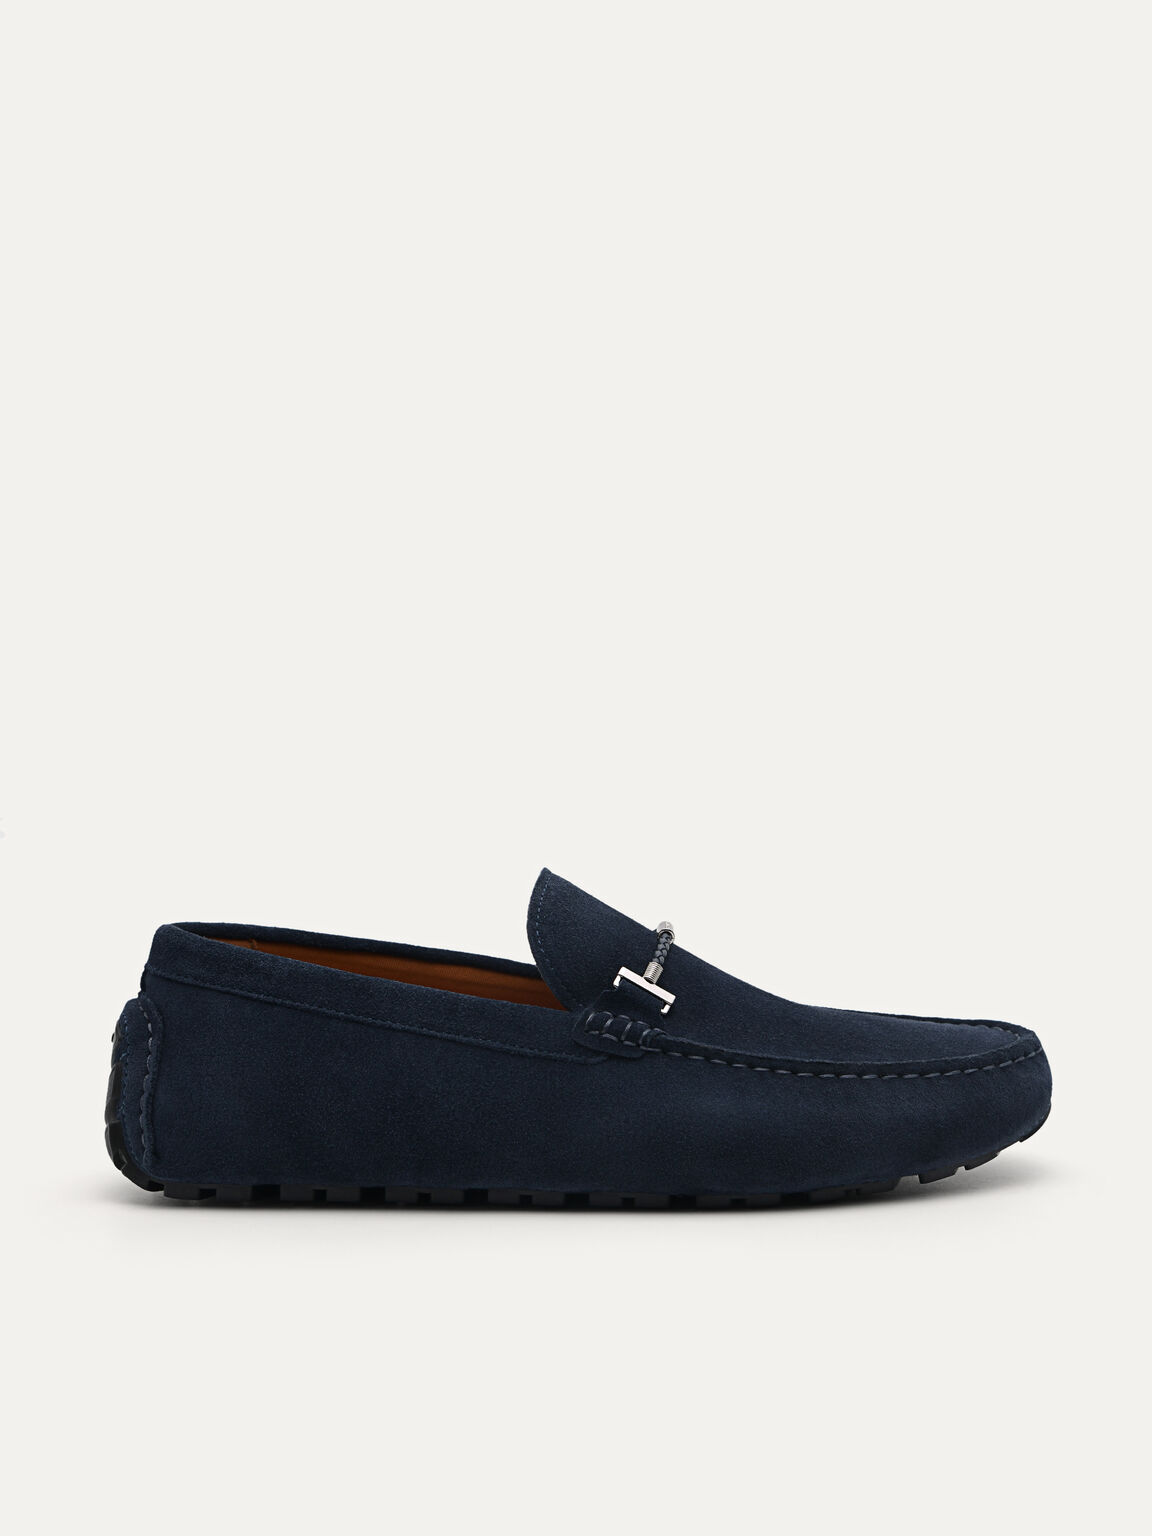 Robert Suede Leather Moccasins, Navy